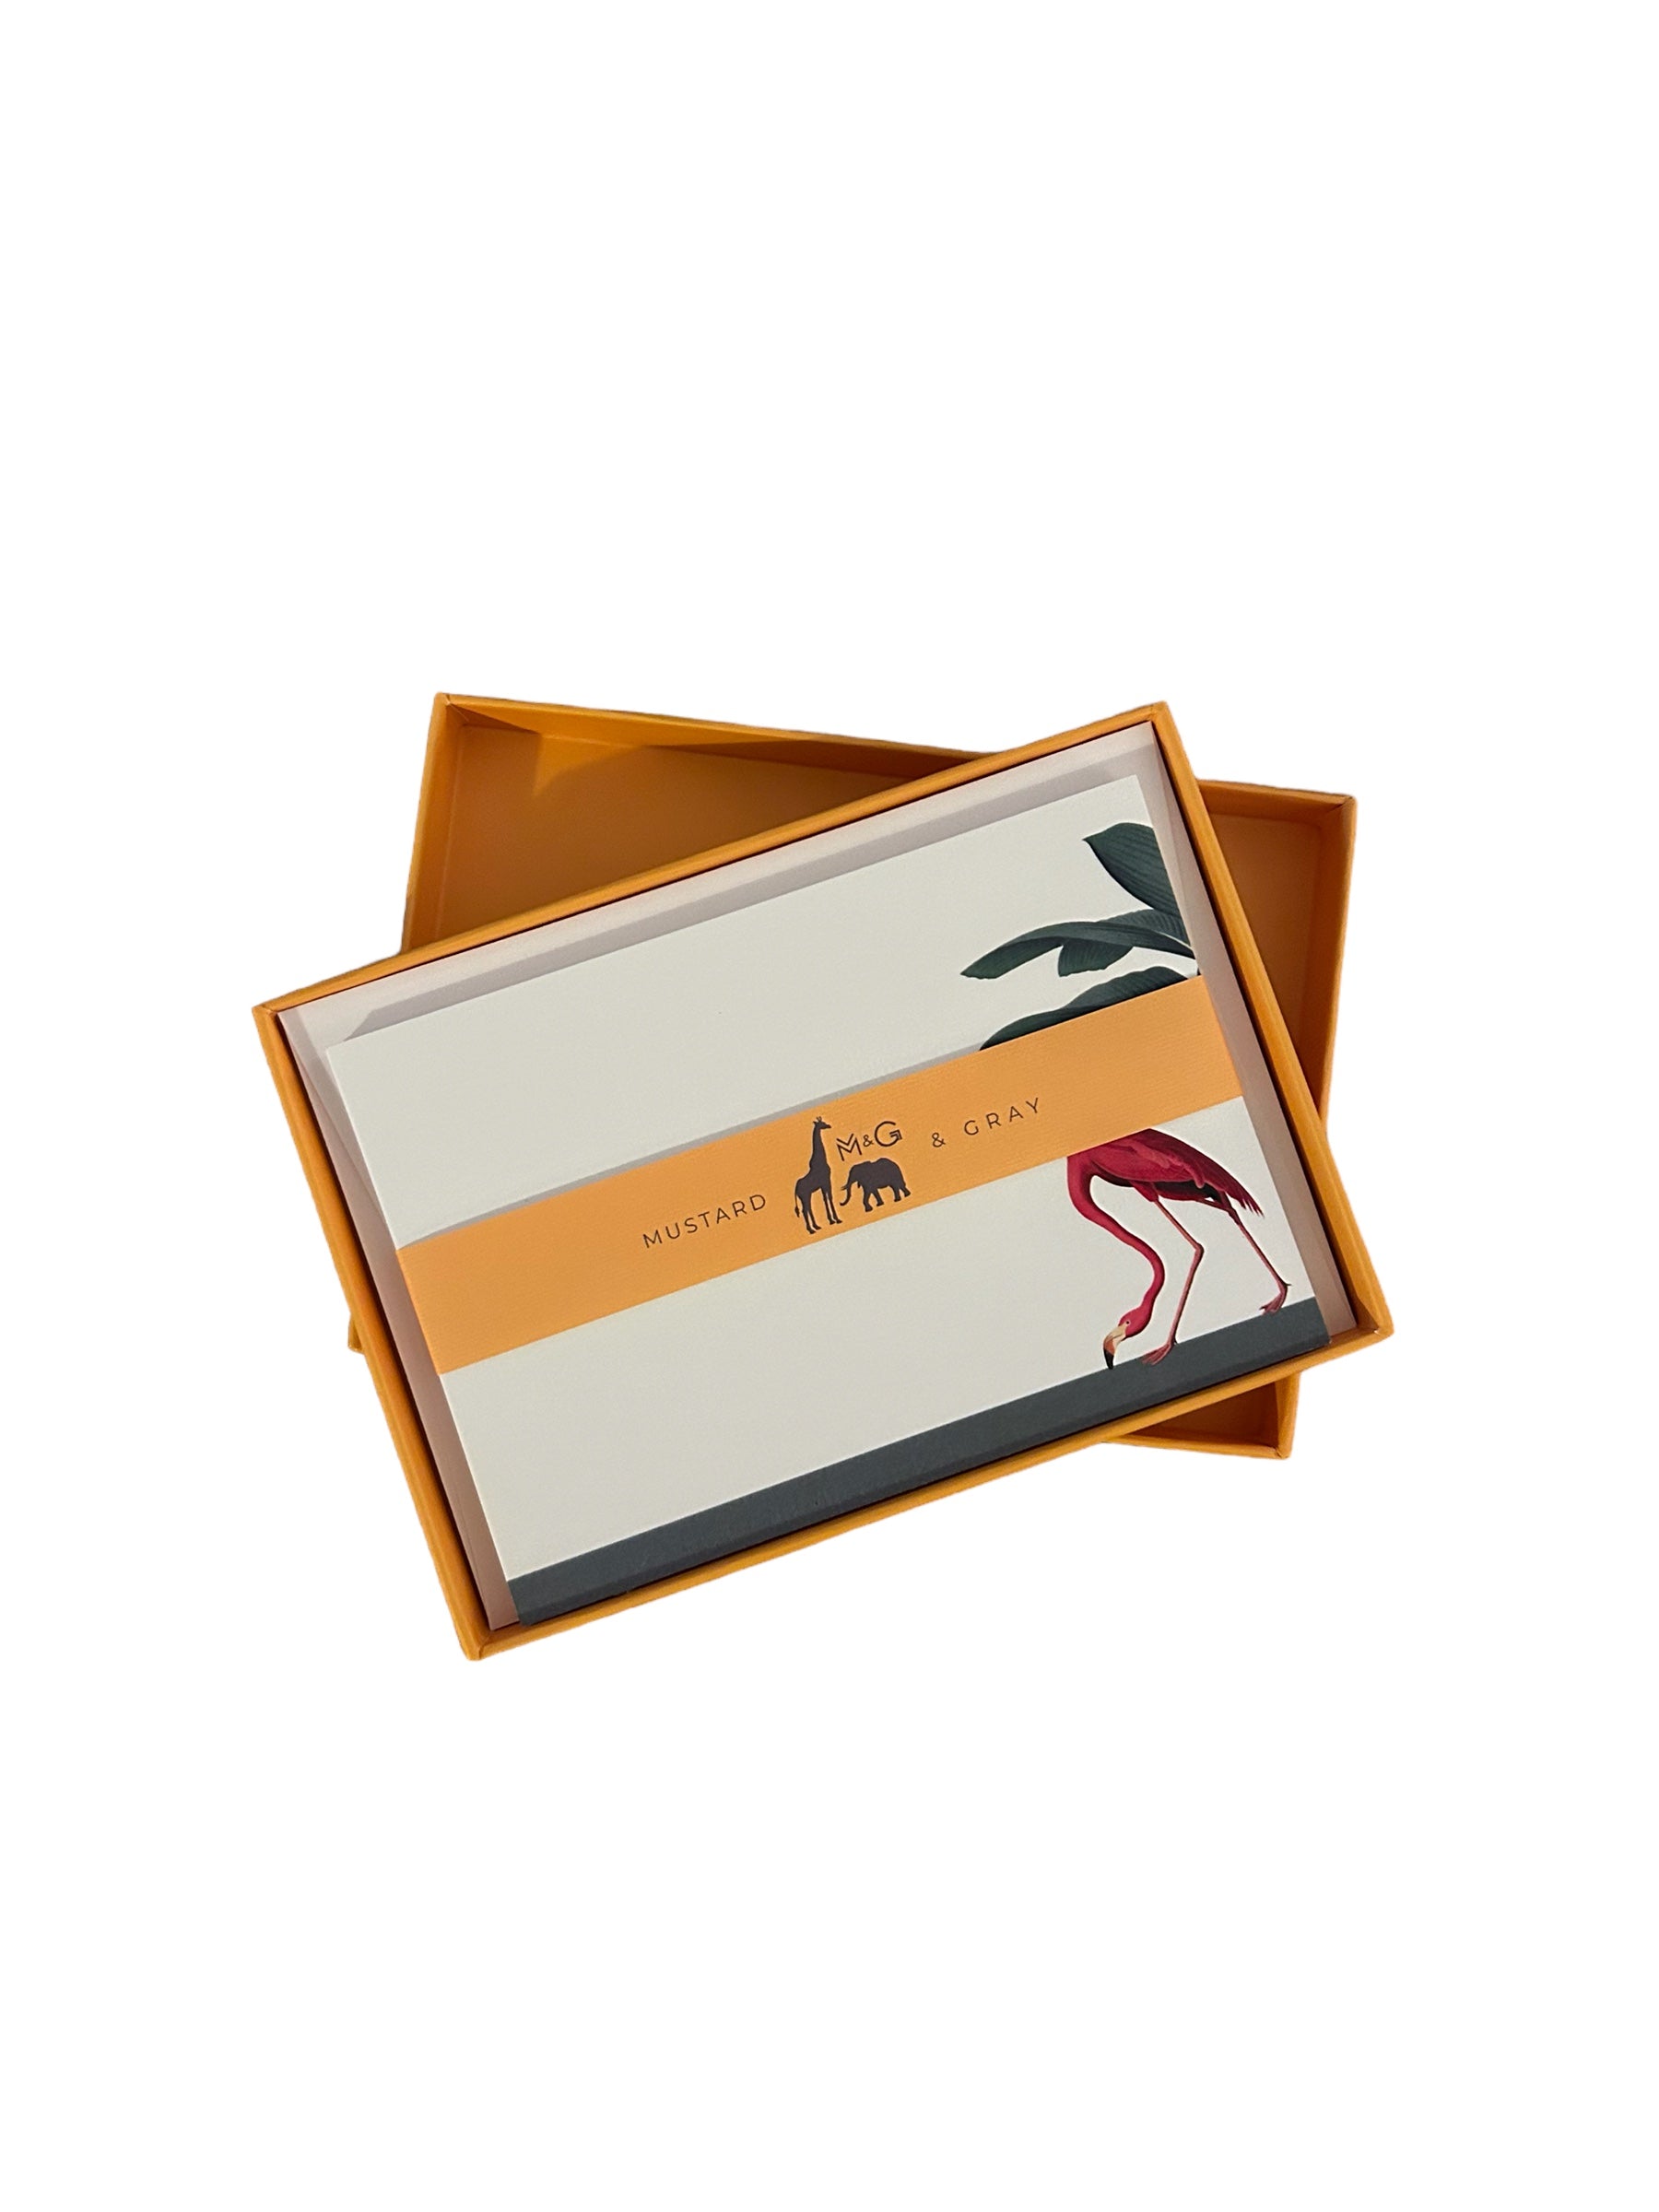 Darwin's Menagerie "Foraging Flamingo" Notecard Set with Laid Envelopes